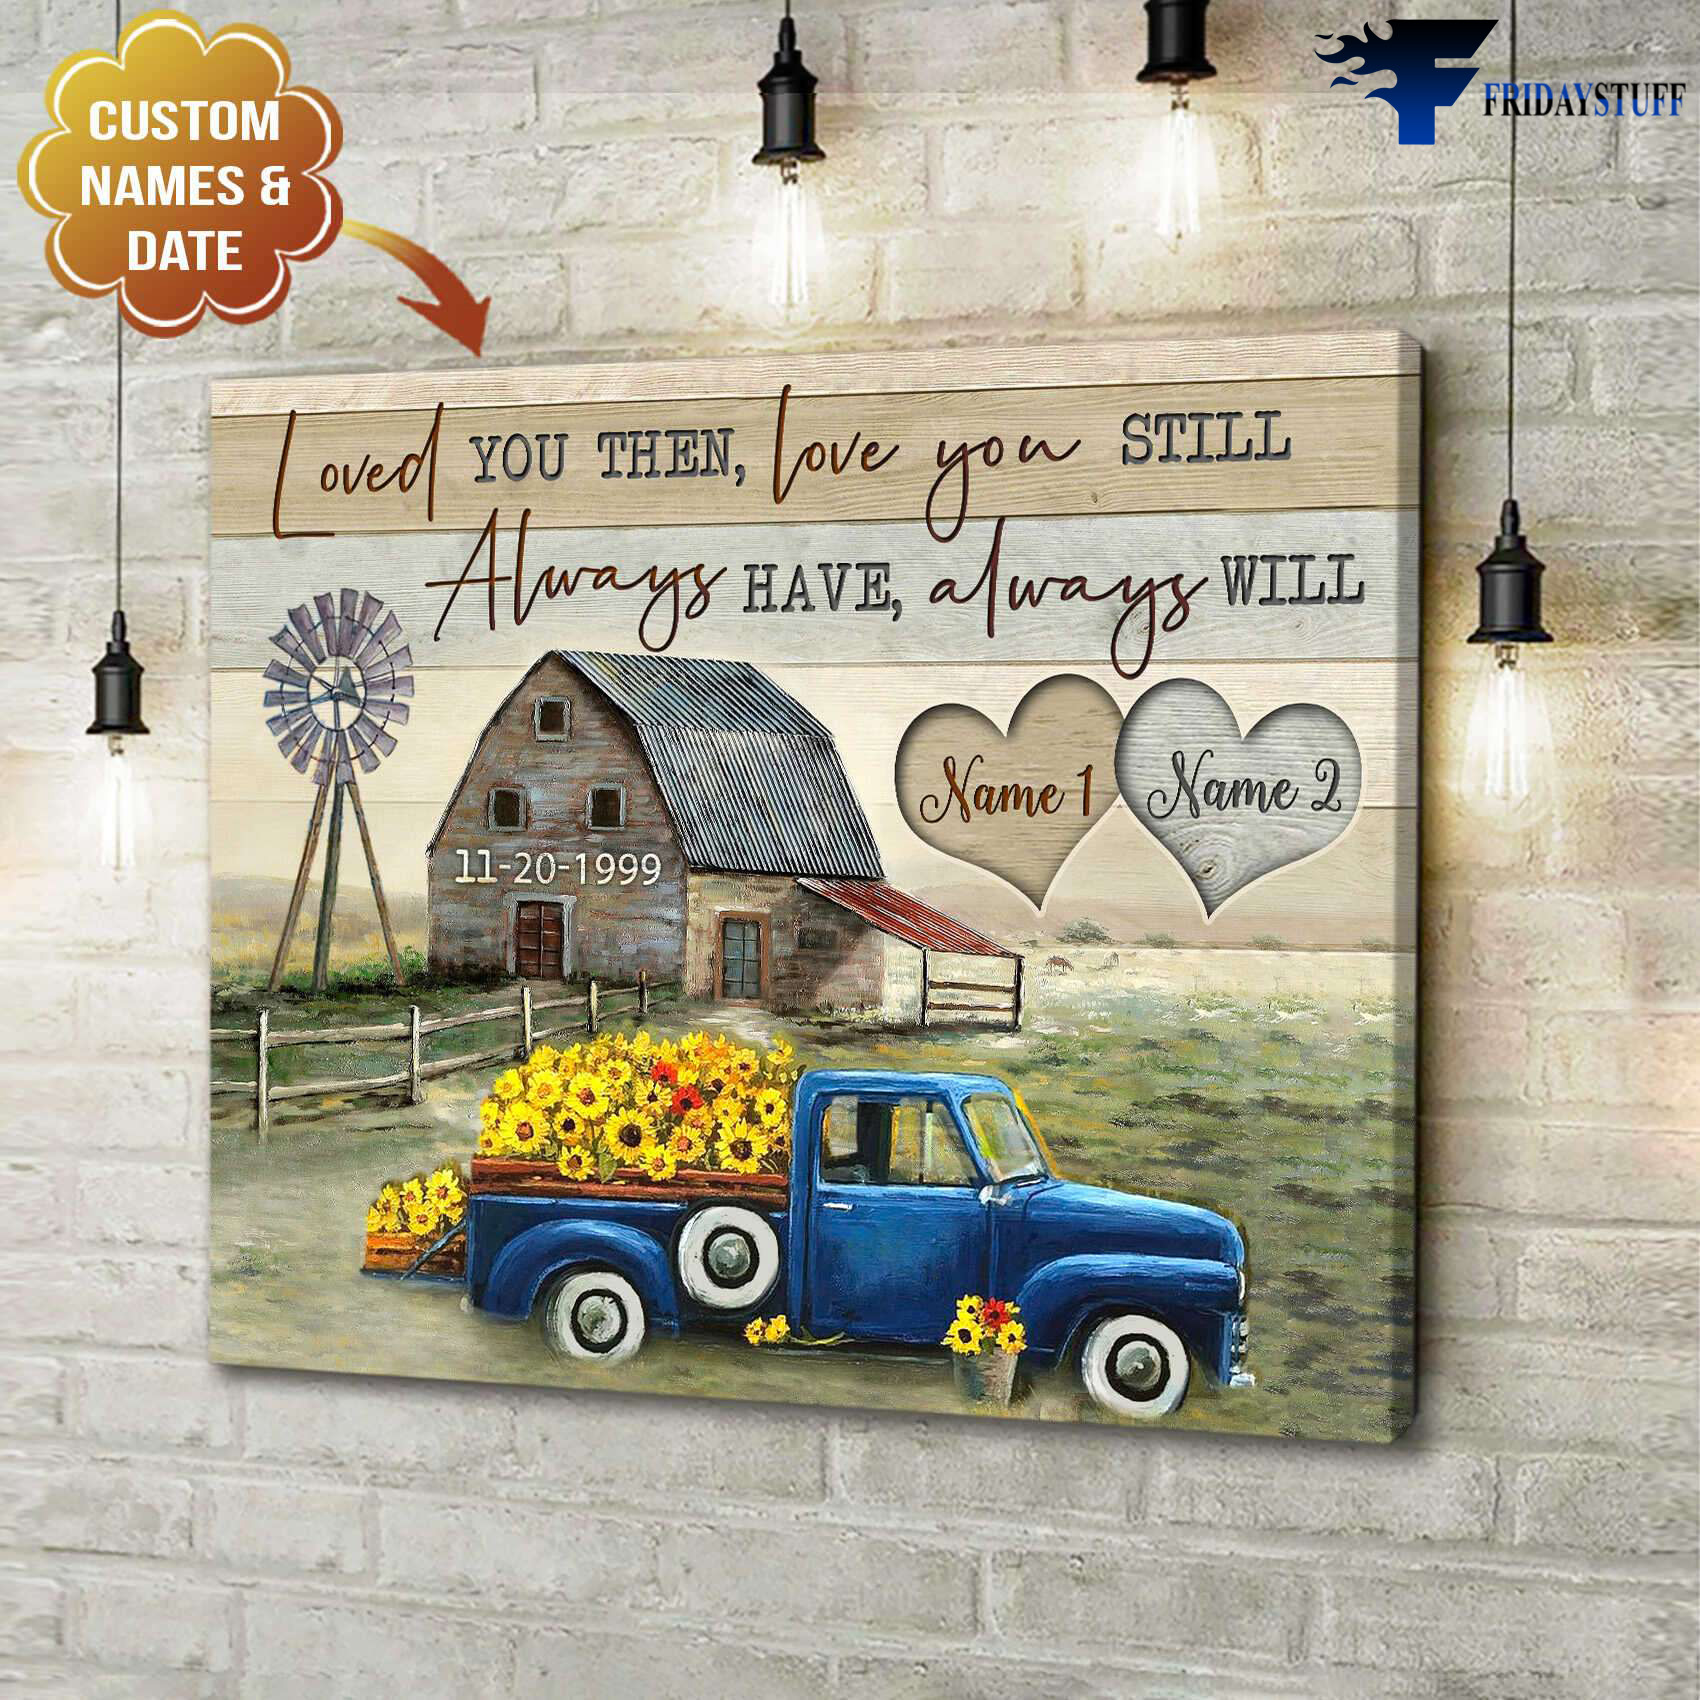 Sunflower Truck, Loved You Then, Love You Still, Always Have, Always Will, Farmhouse Scene